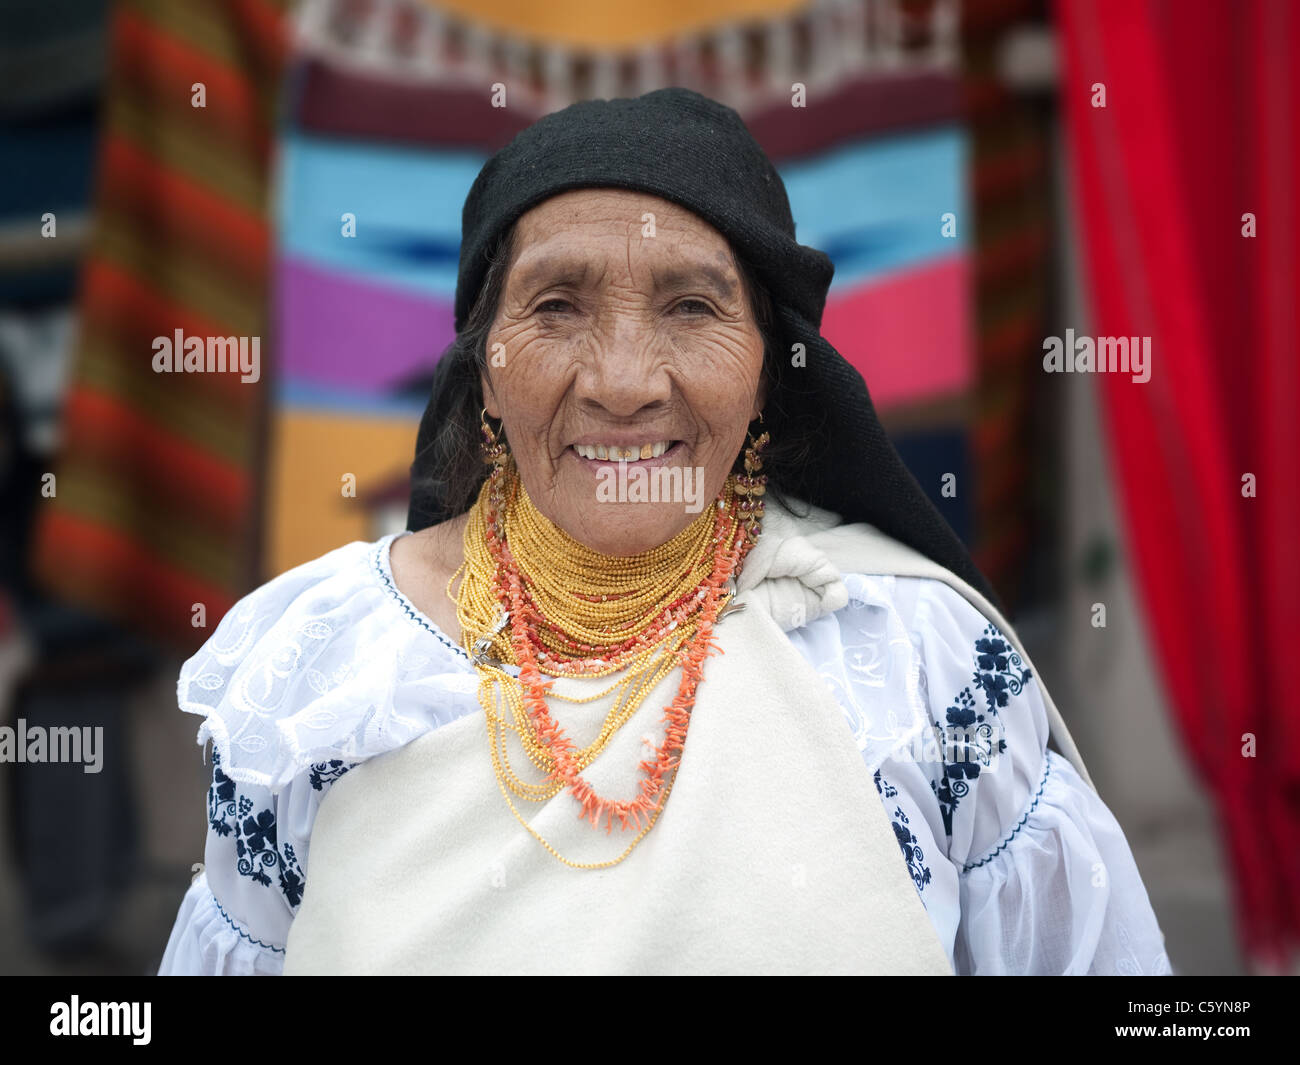 South American indigenous woman selling her hand-made crafts in the Otavalo Market in Ecuador. Stock Photo